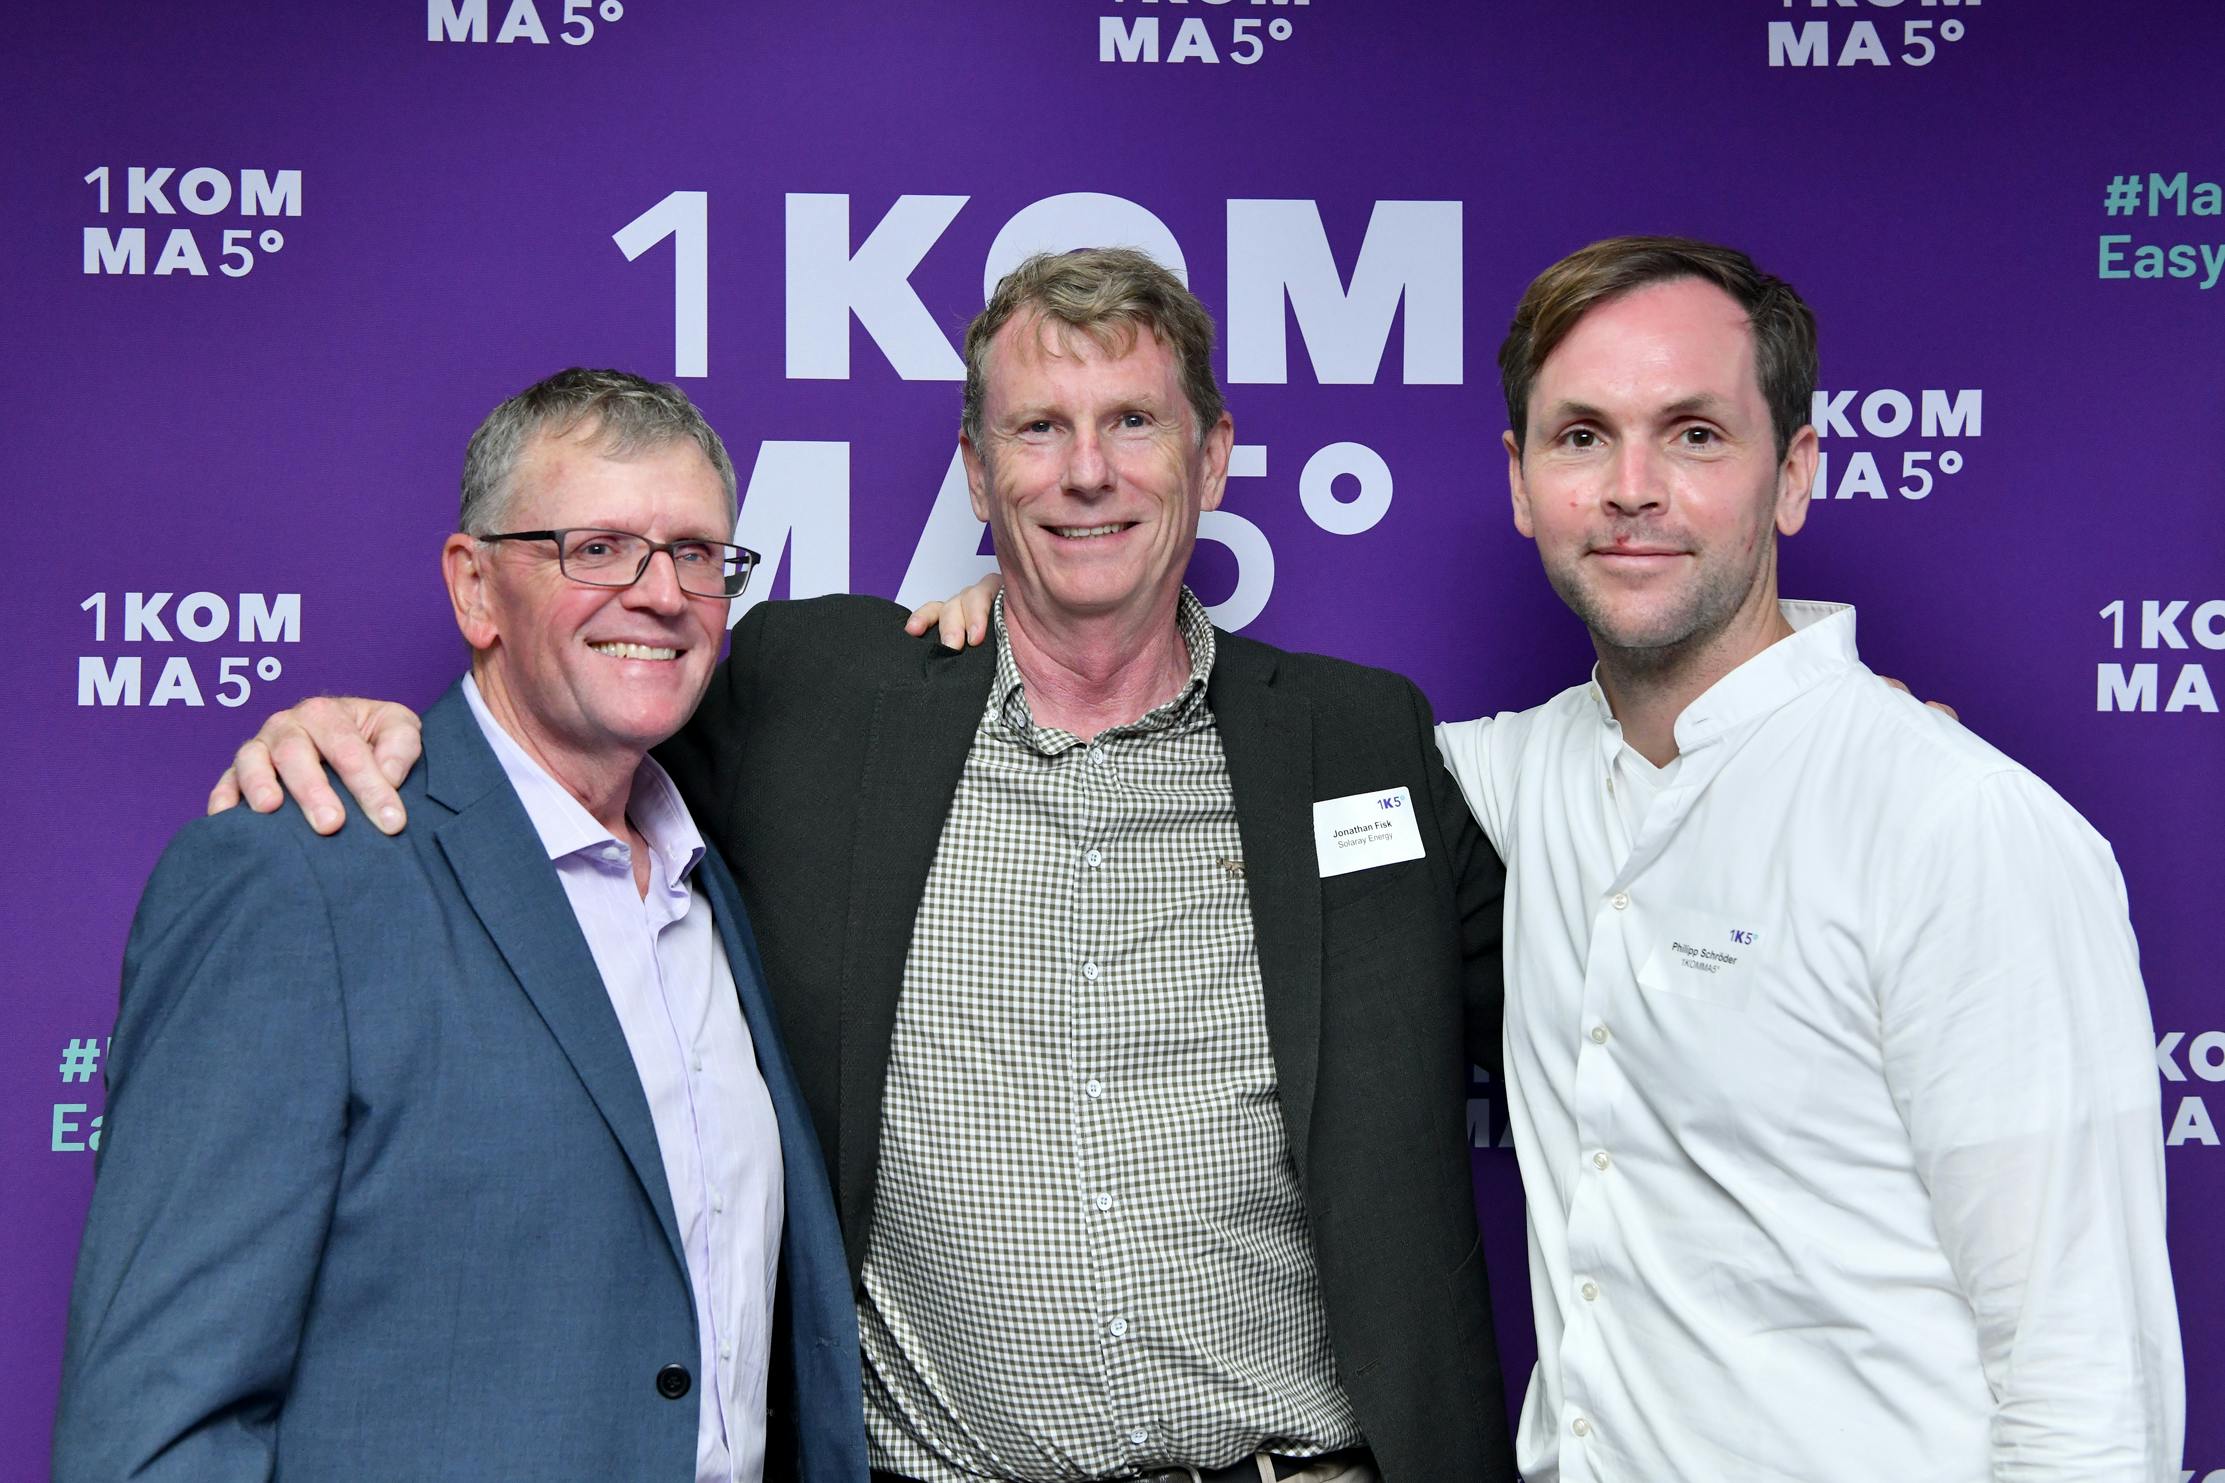 Pete Thorne, Director of Solaray Energy, Jonathan Fisk, Director of Solaray Energy and  Philipp Schröder, Co-Founder & CEO of 1KOMMA5°